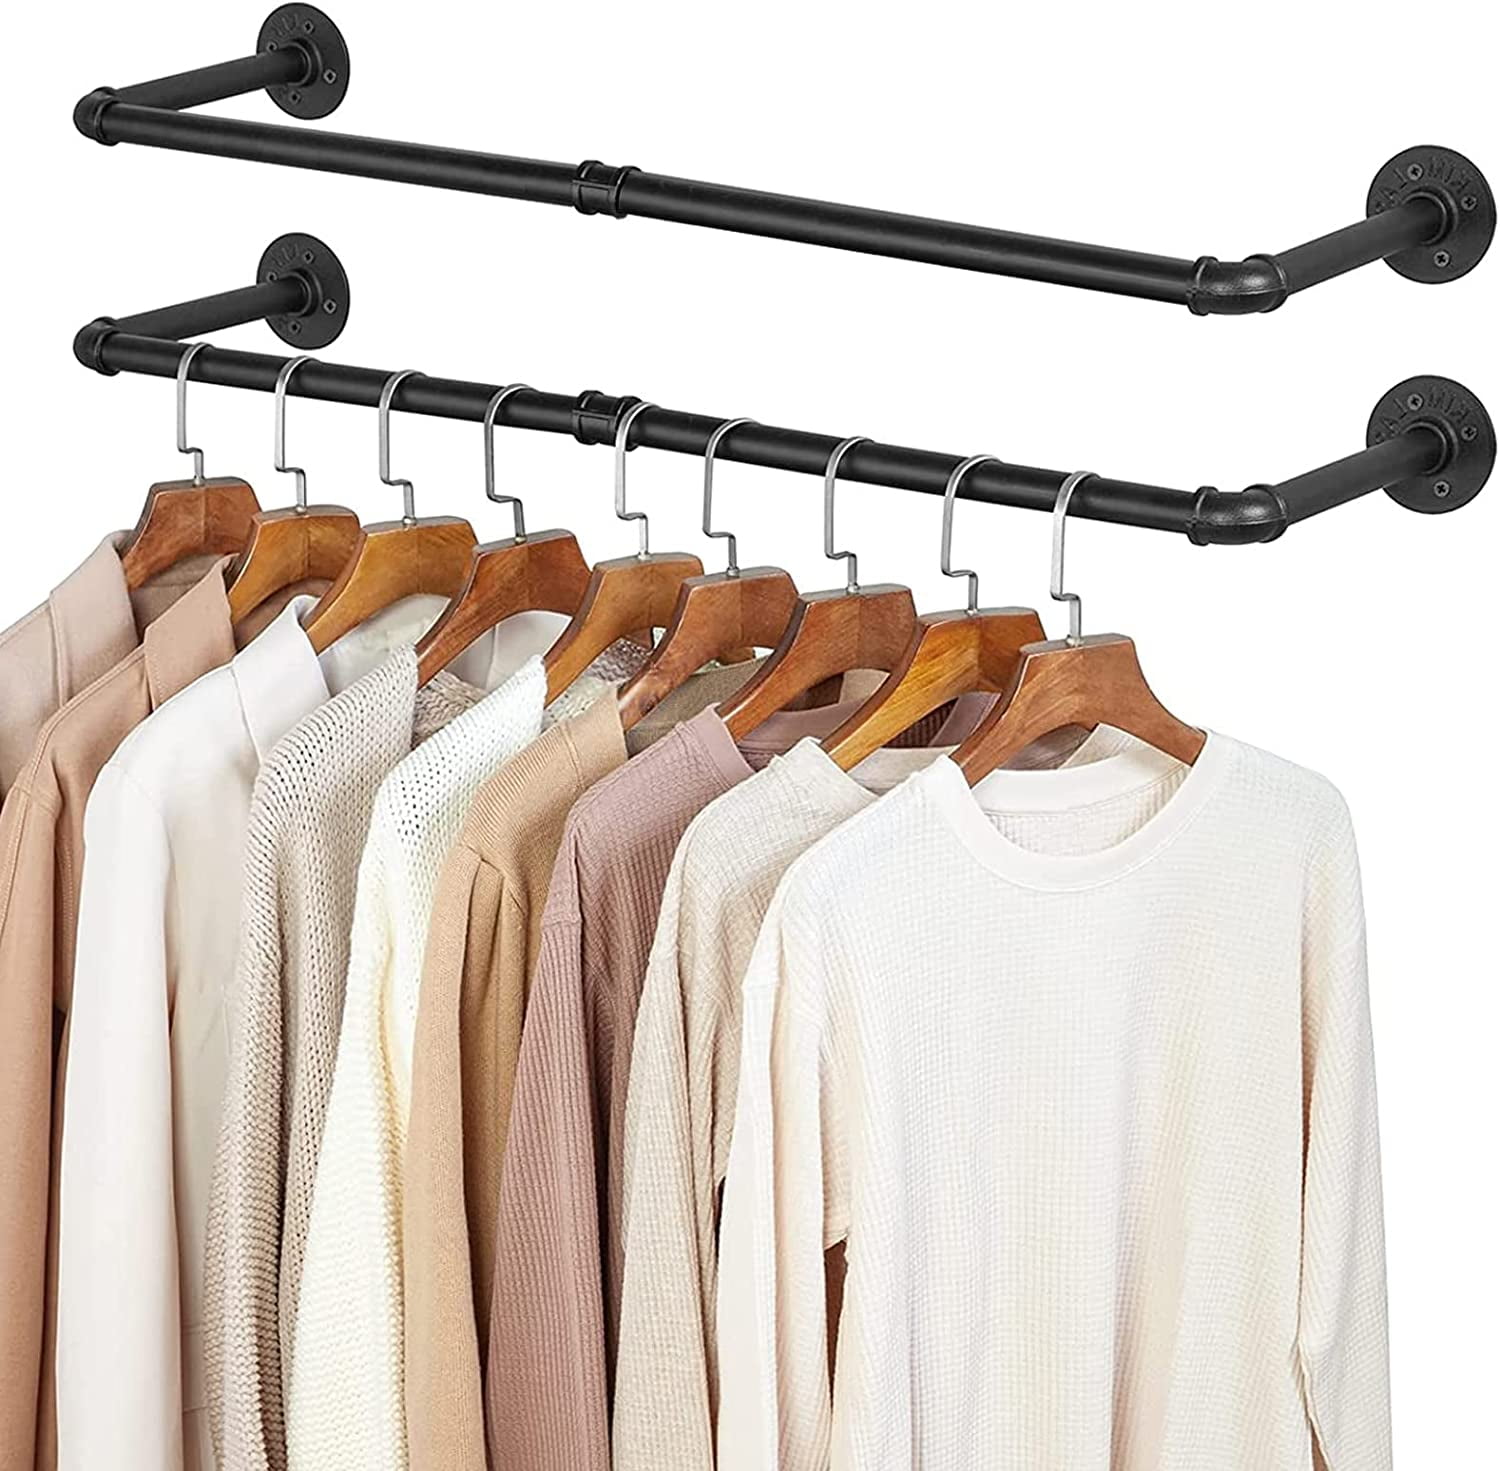 Clothes Rack 38.4 in Industrial Pipe Wall Mounted Garment Rack Hanging  Heavy Duty Garment Bar,Multi-Purpose Hanging Rod,2 Pack 